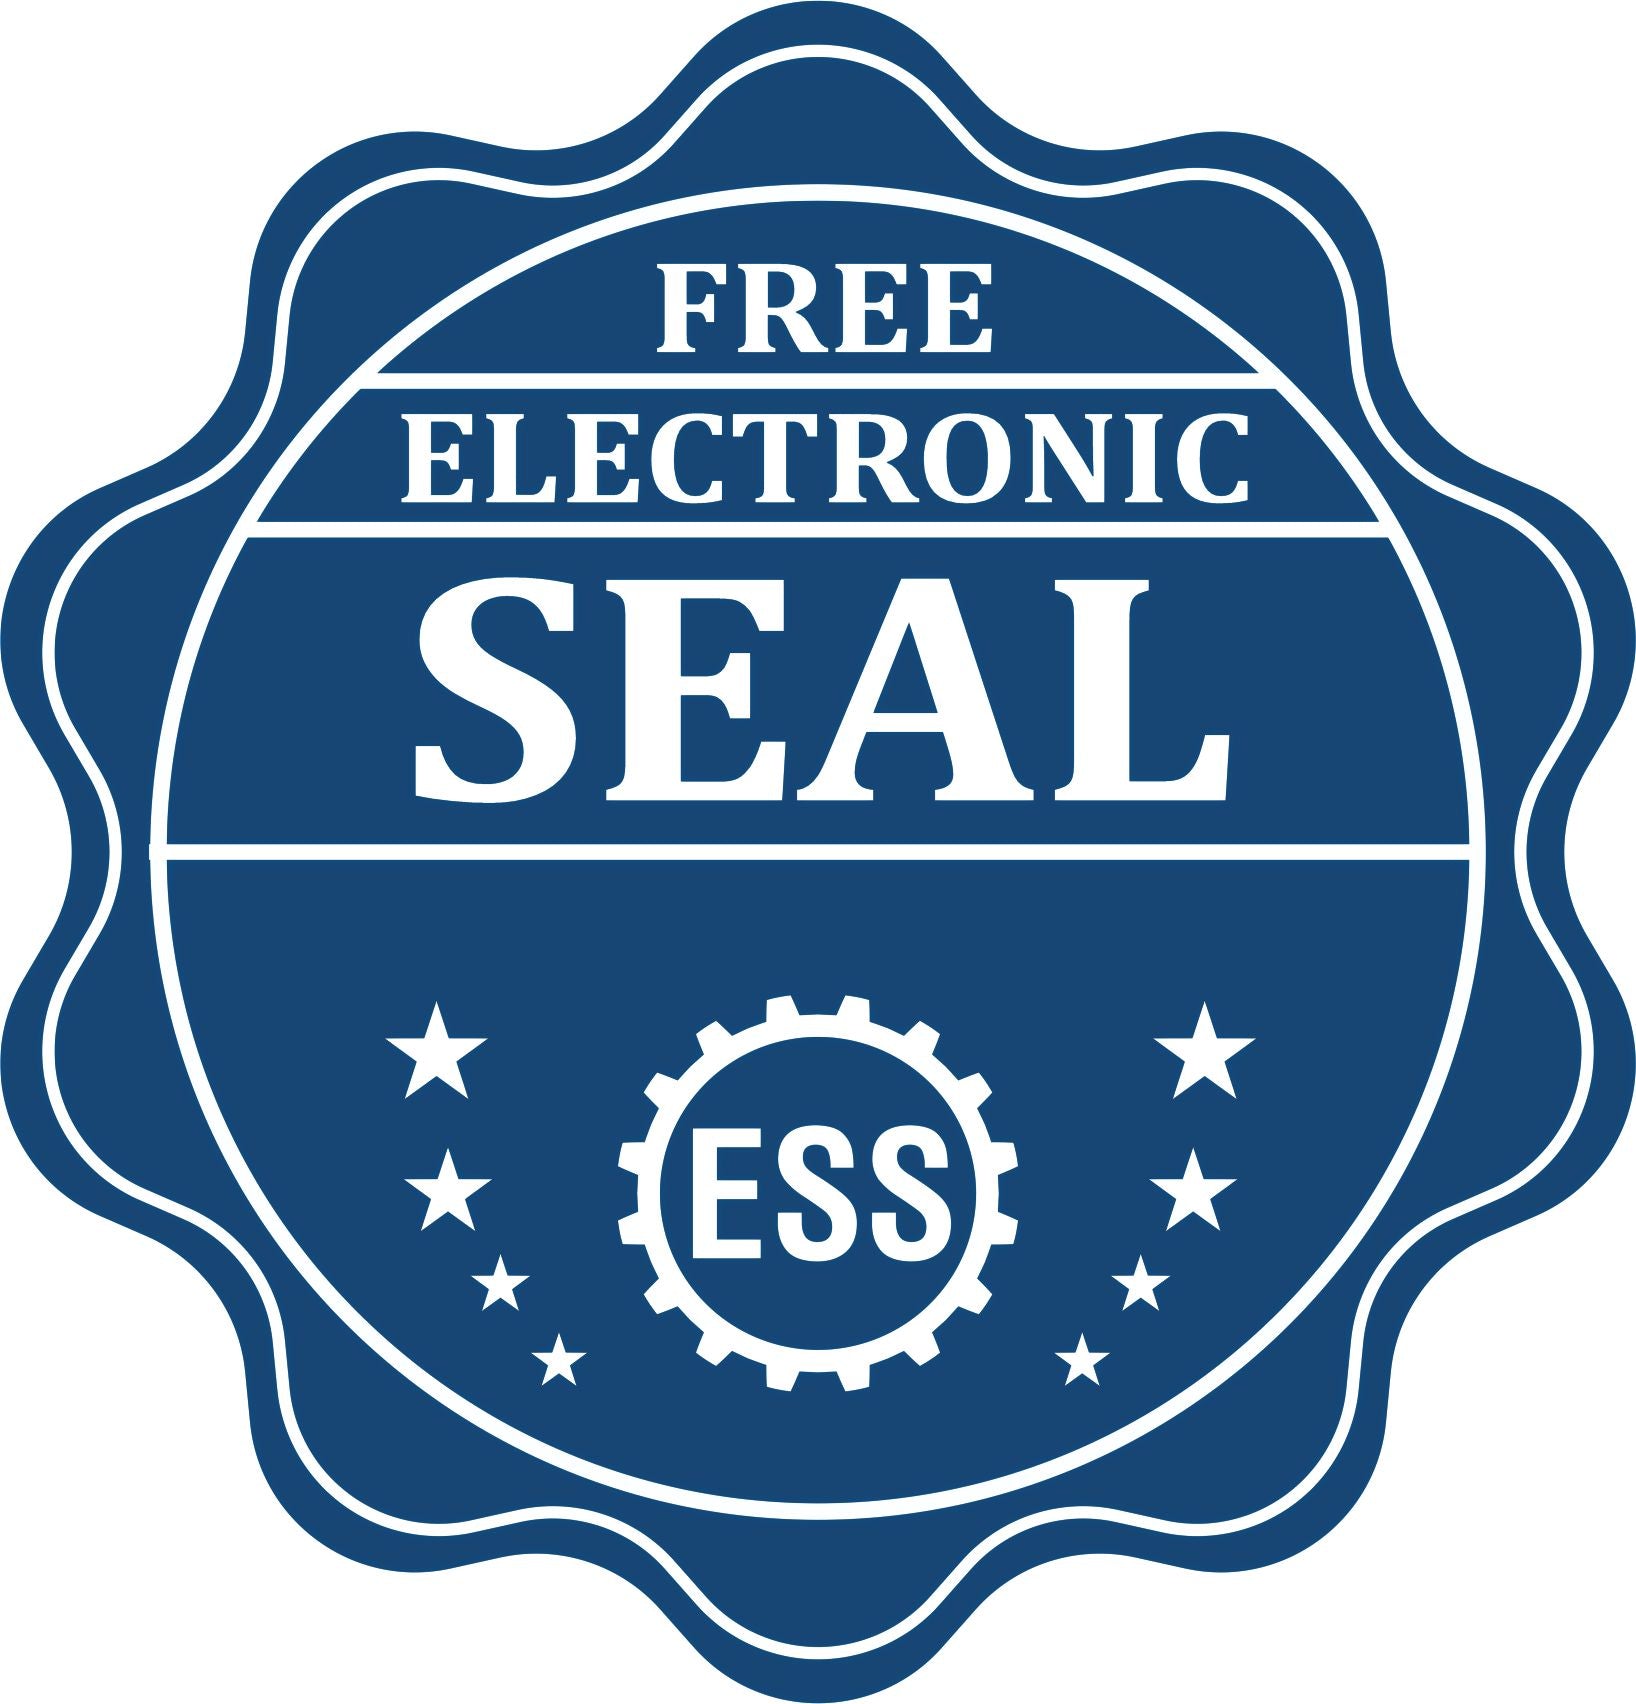 A badge showing a free electronic seal for the Long Reach Virginia Land Surveyor Seal with stars and the ESS gear on the emblem.